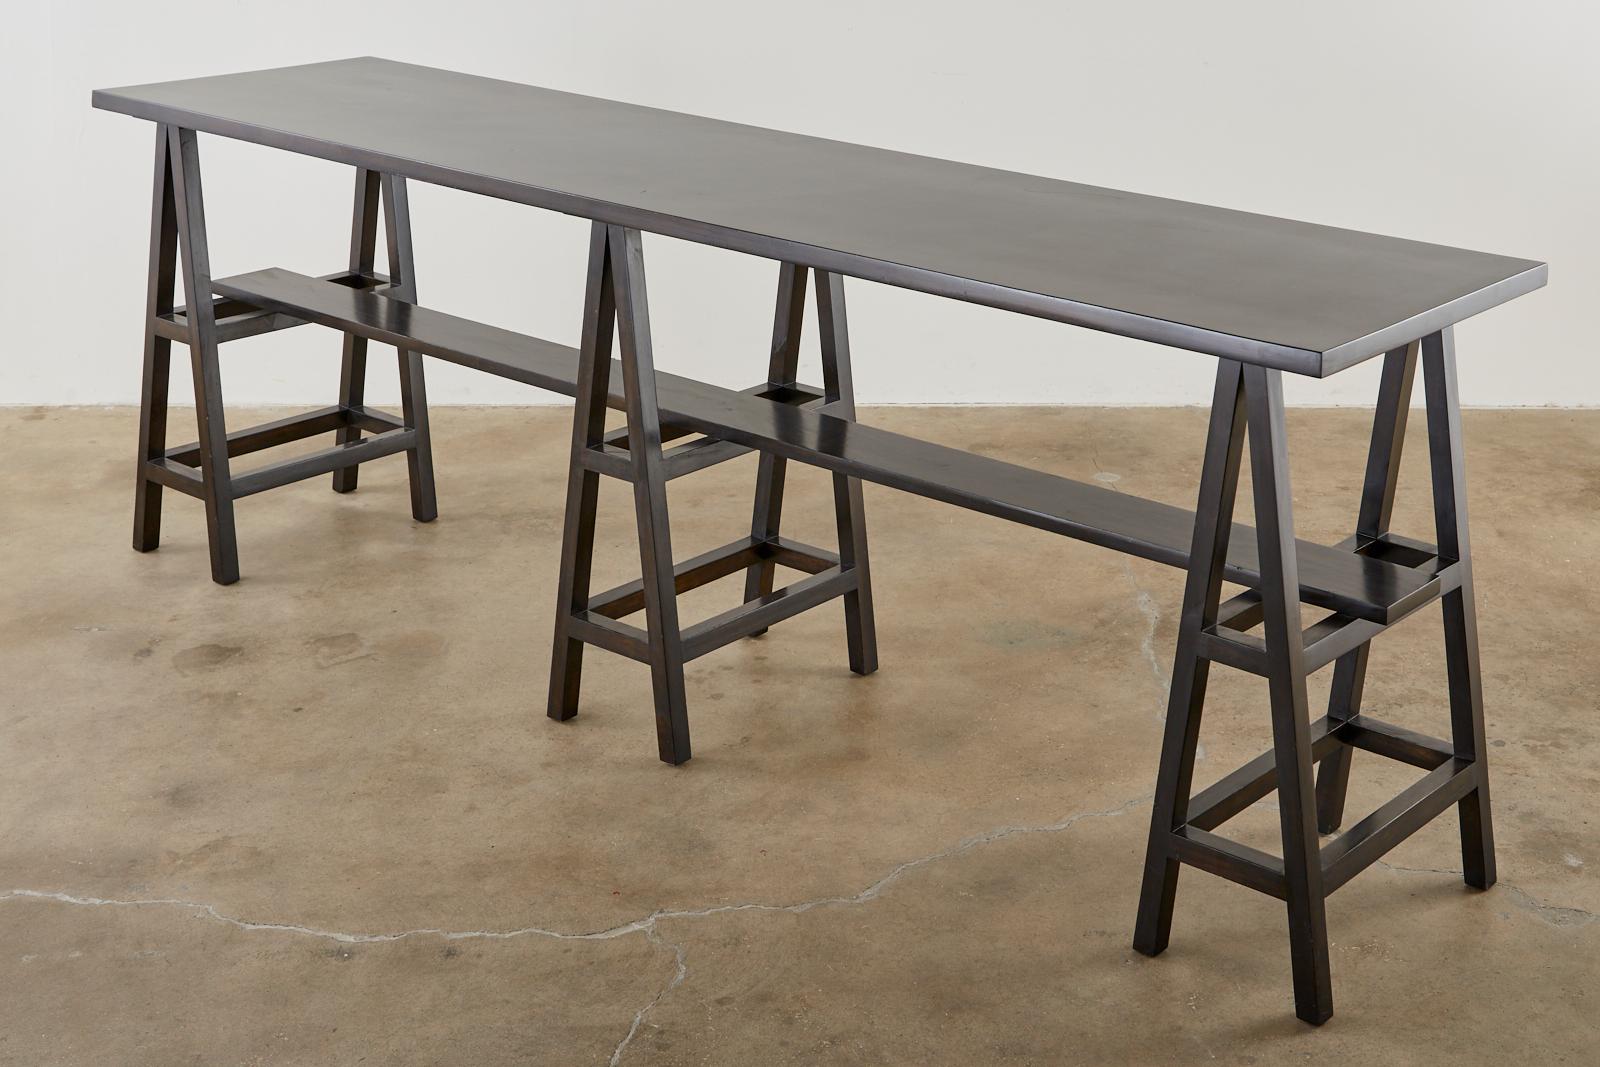 Distinctive modern style trestle table or bar constructed from three sawhorse style pedestals. The long table could be used as a counter height bar (36 inches high) or a large console table. The height makes it comfortable to stand or sit with a